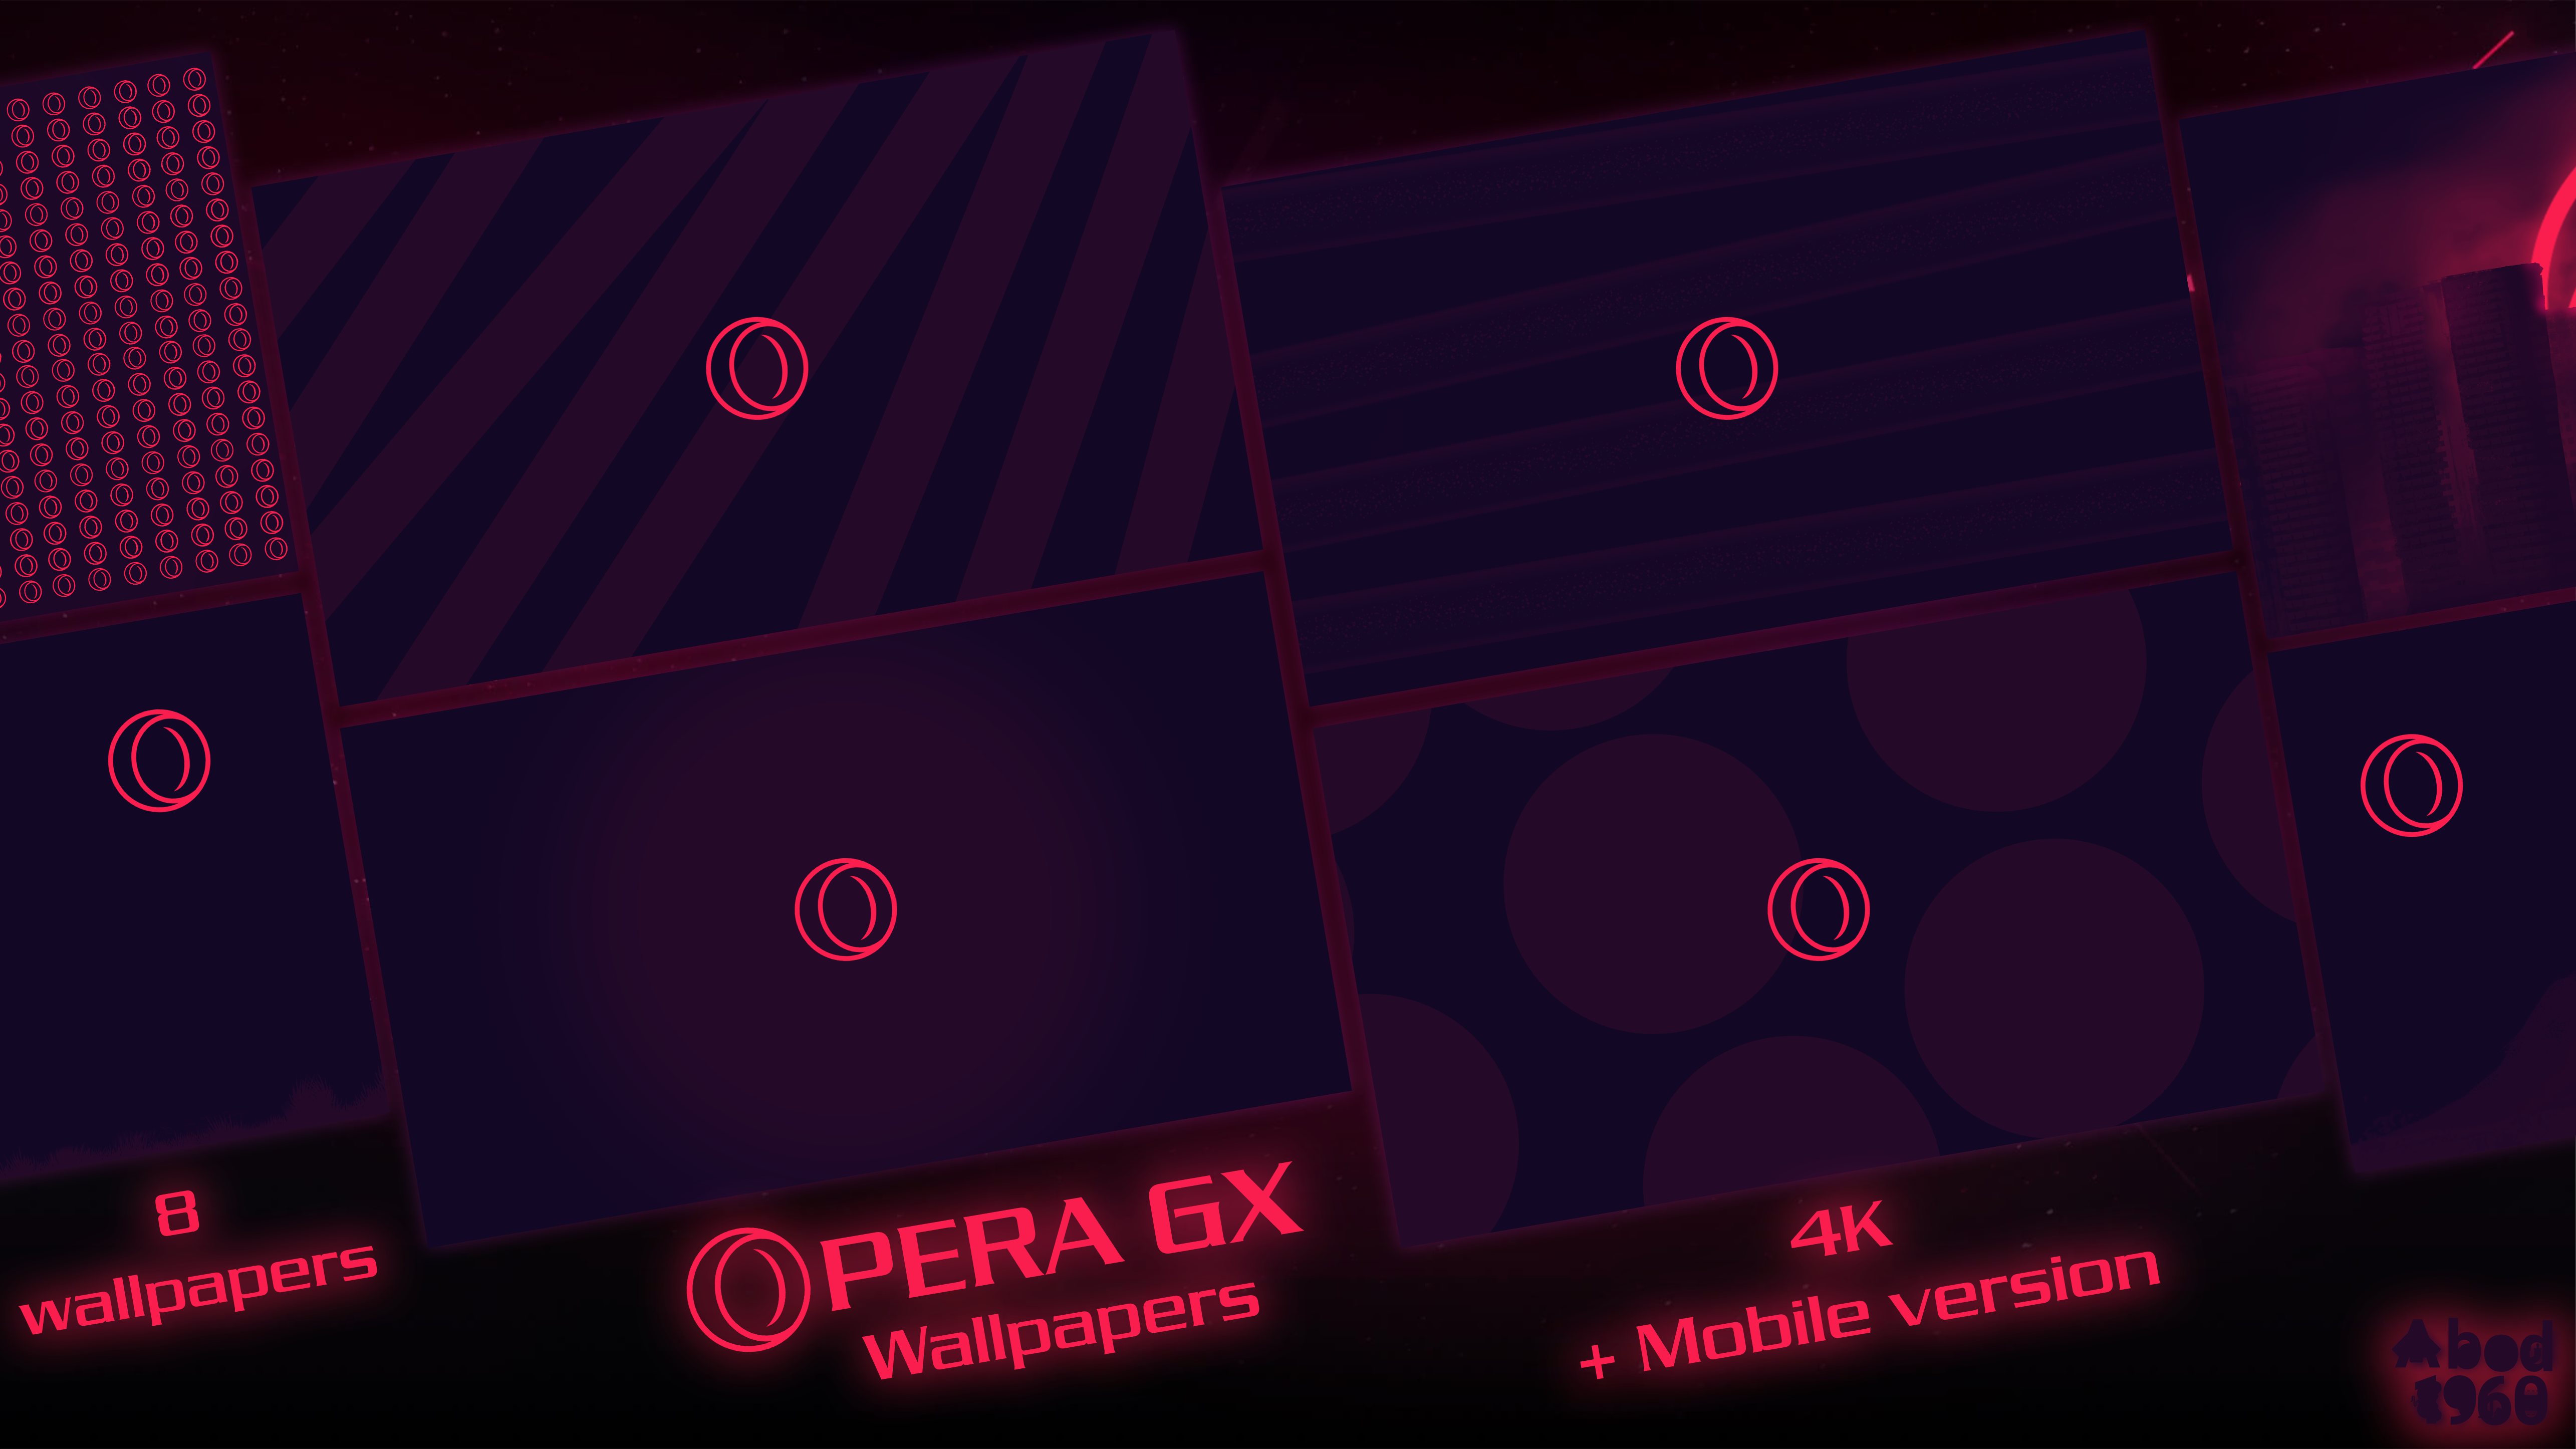 How to Use Opera GXs Live Wallpapers